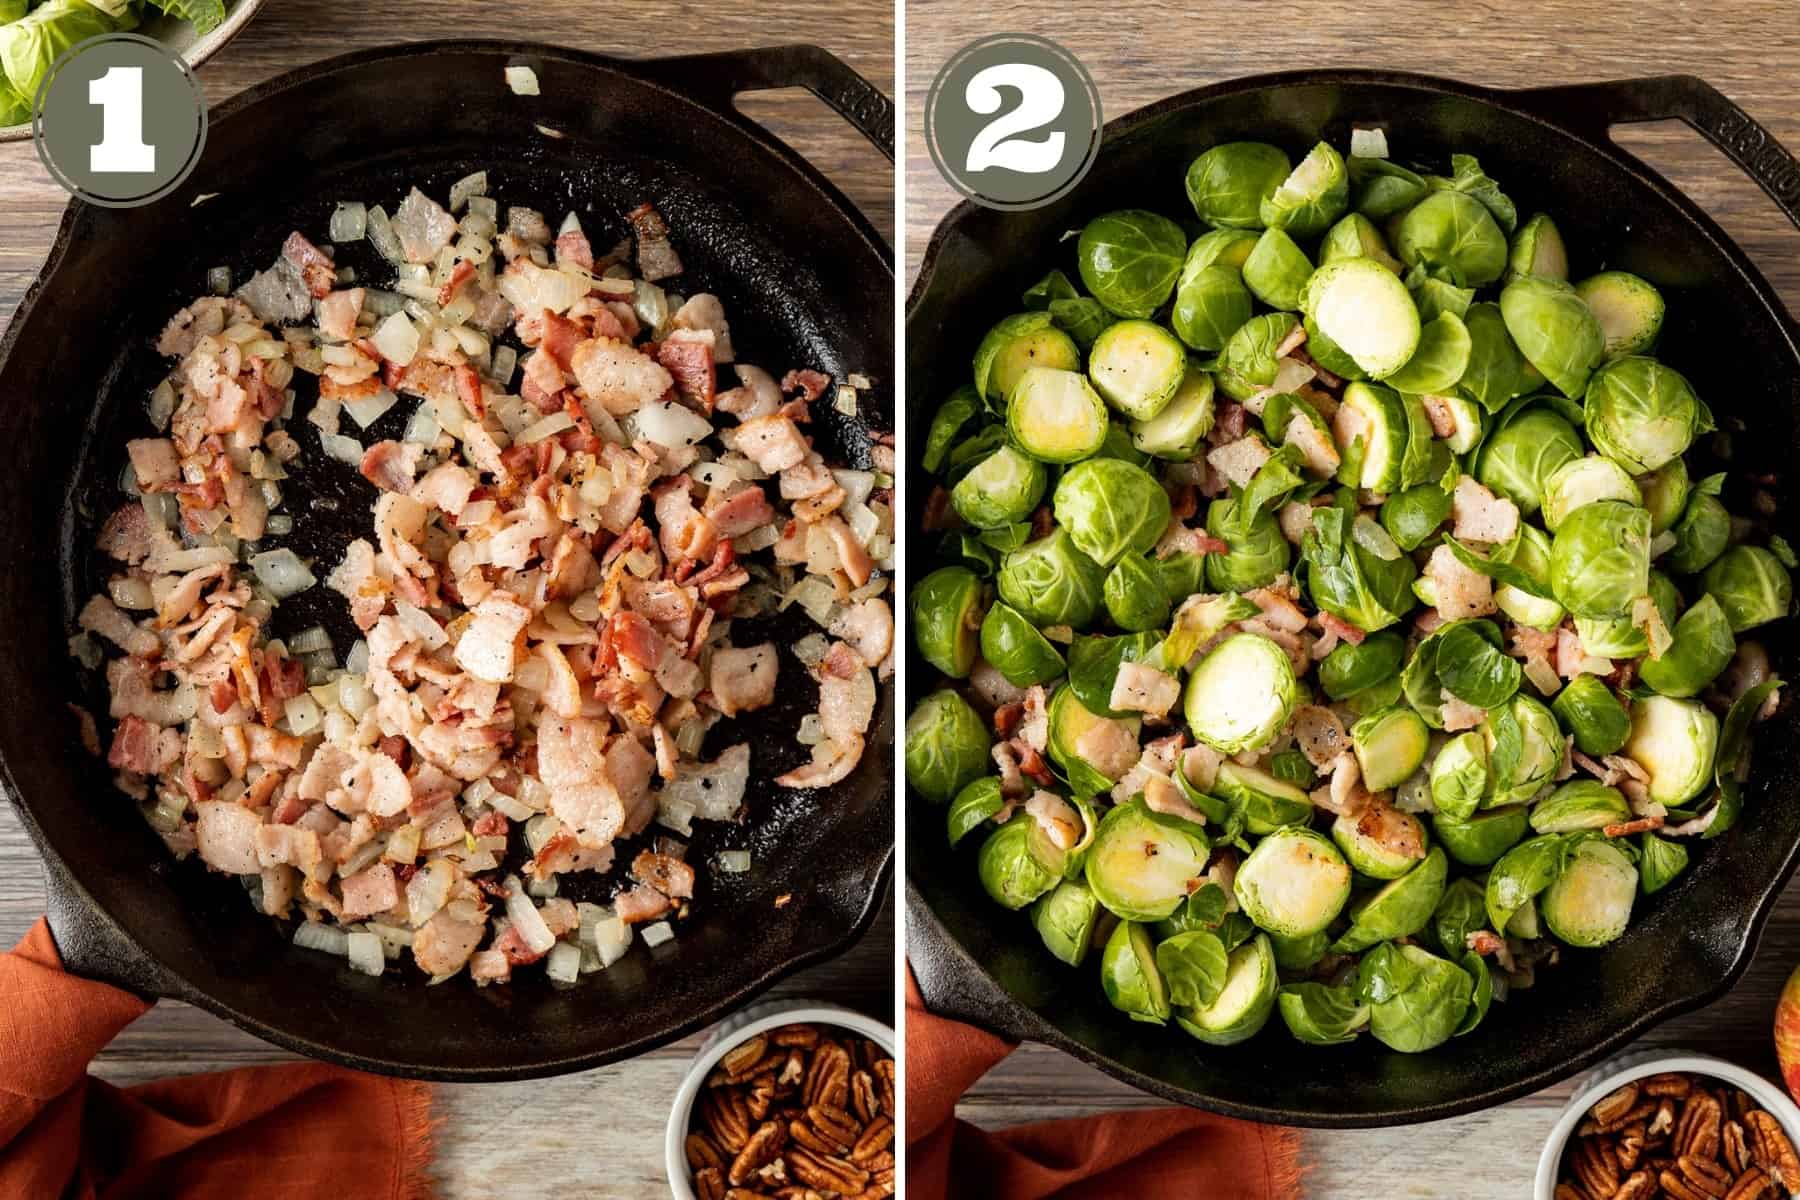 Process shots of bacon and onions being cooked in a cast iron with brussels sprouts added in.